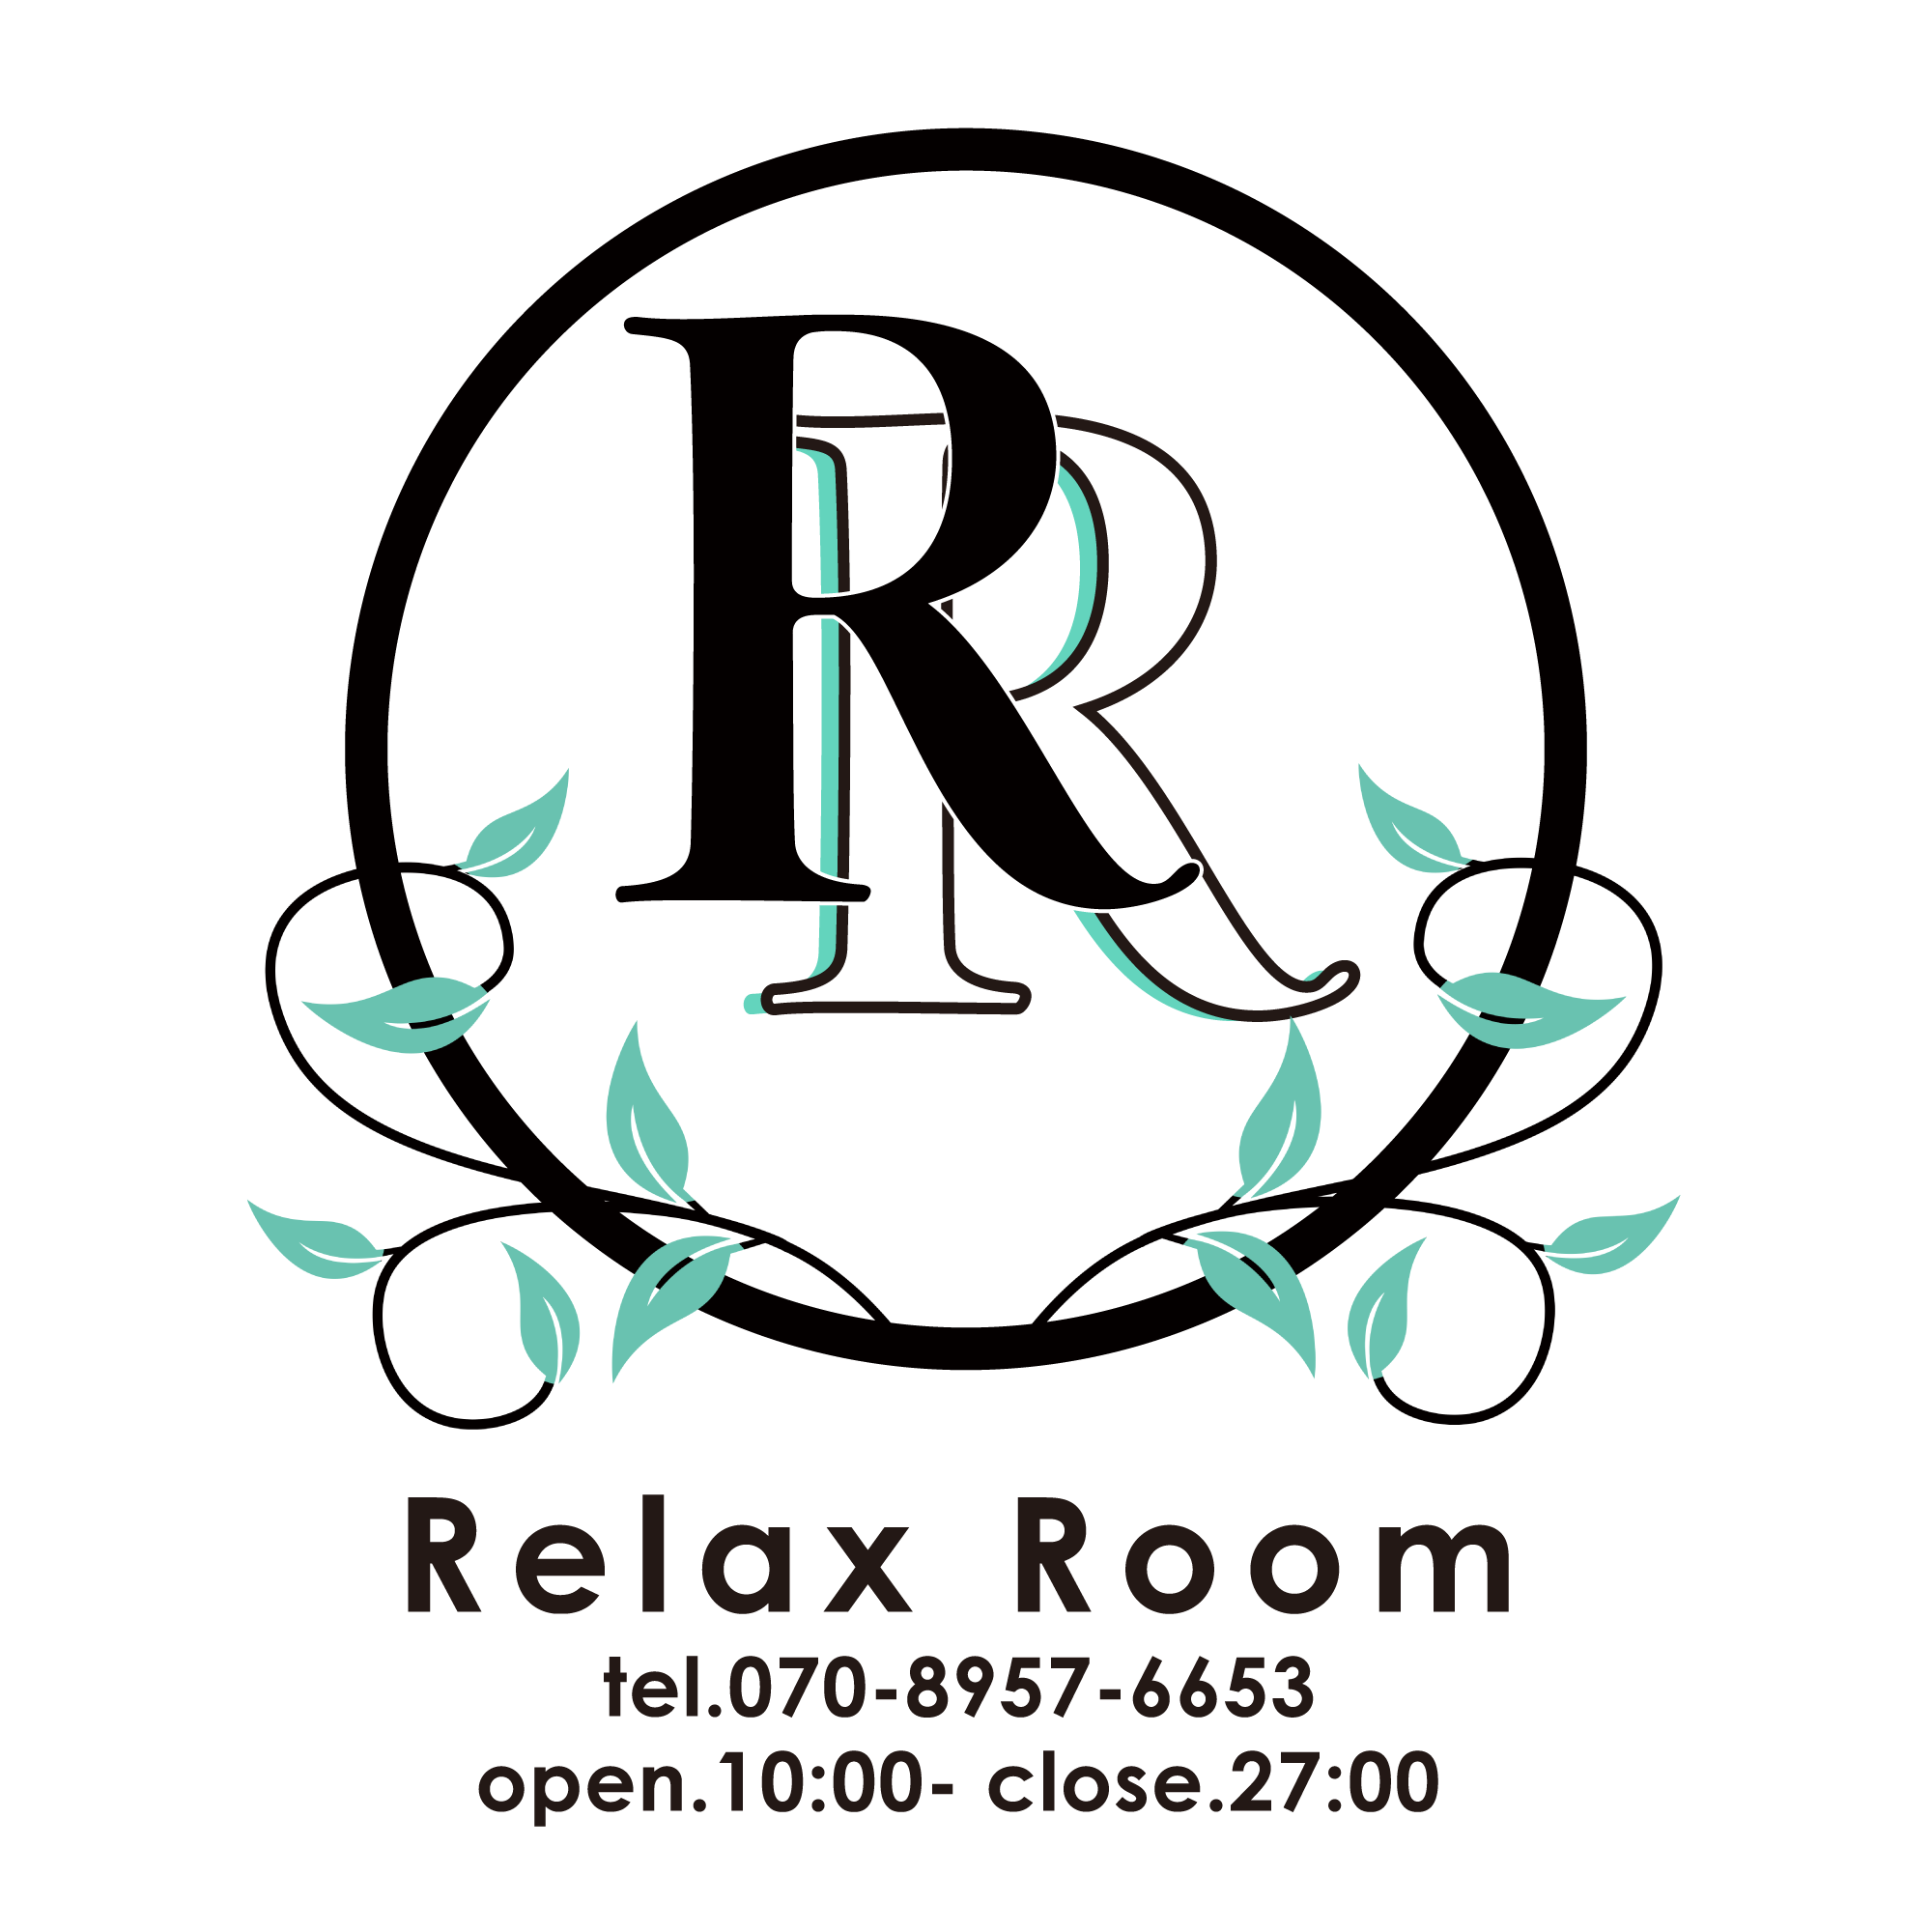 Relax Room